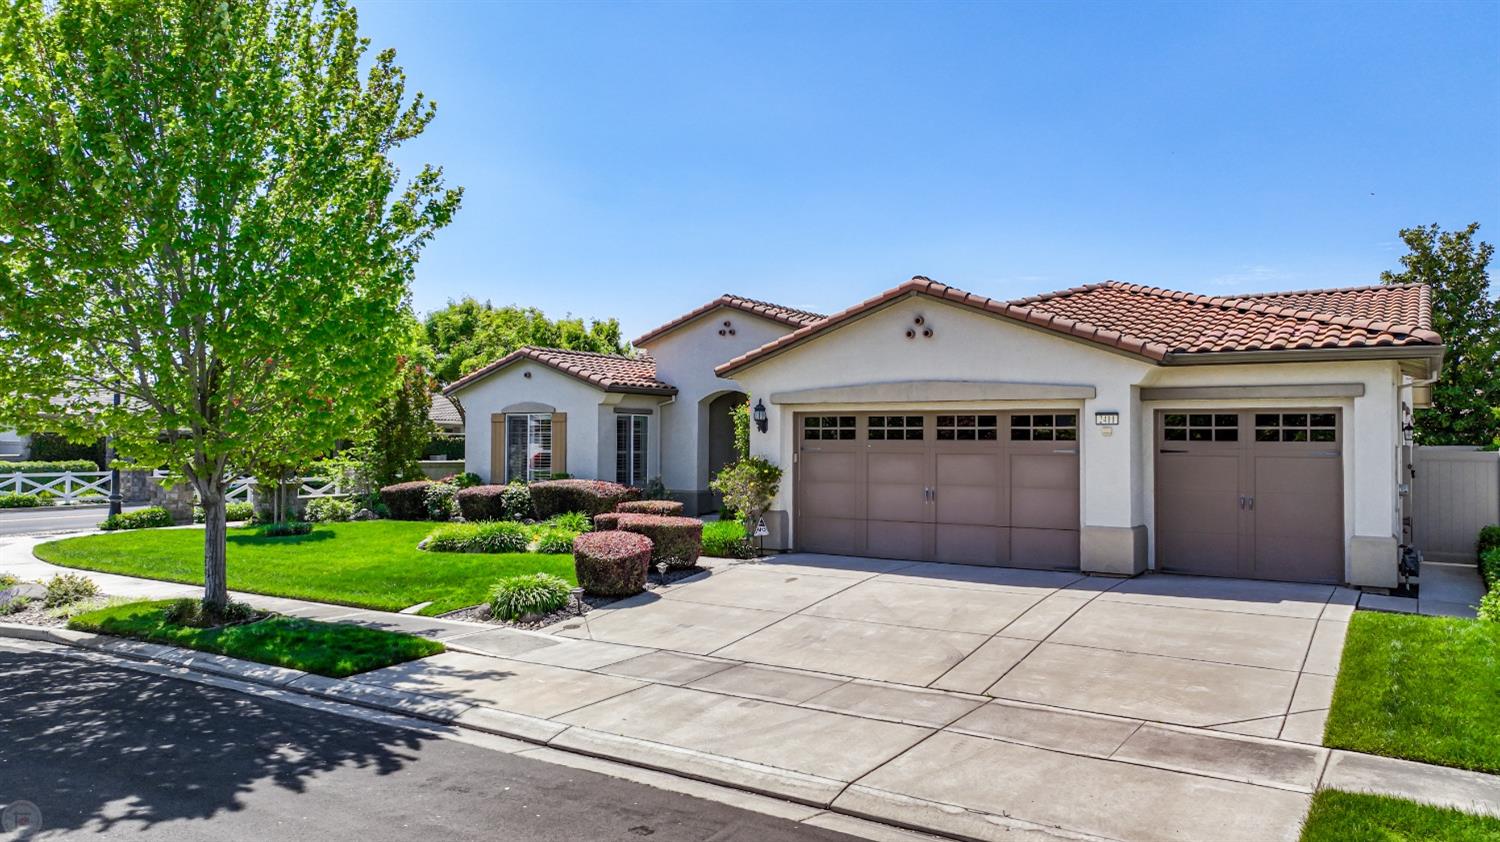 Photo of 2411 Belle Glade Ln in Manteca, CA